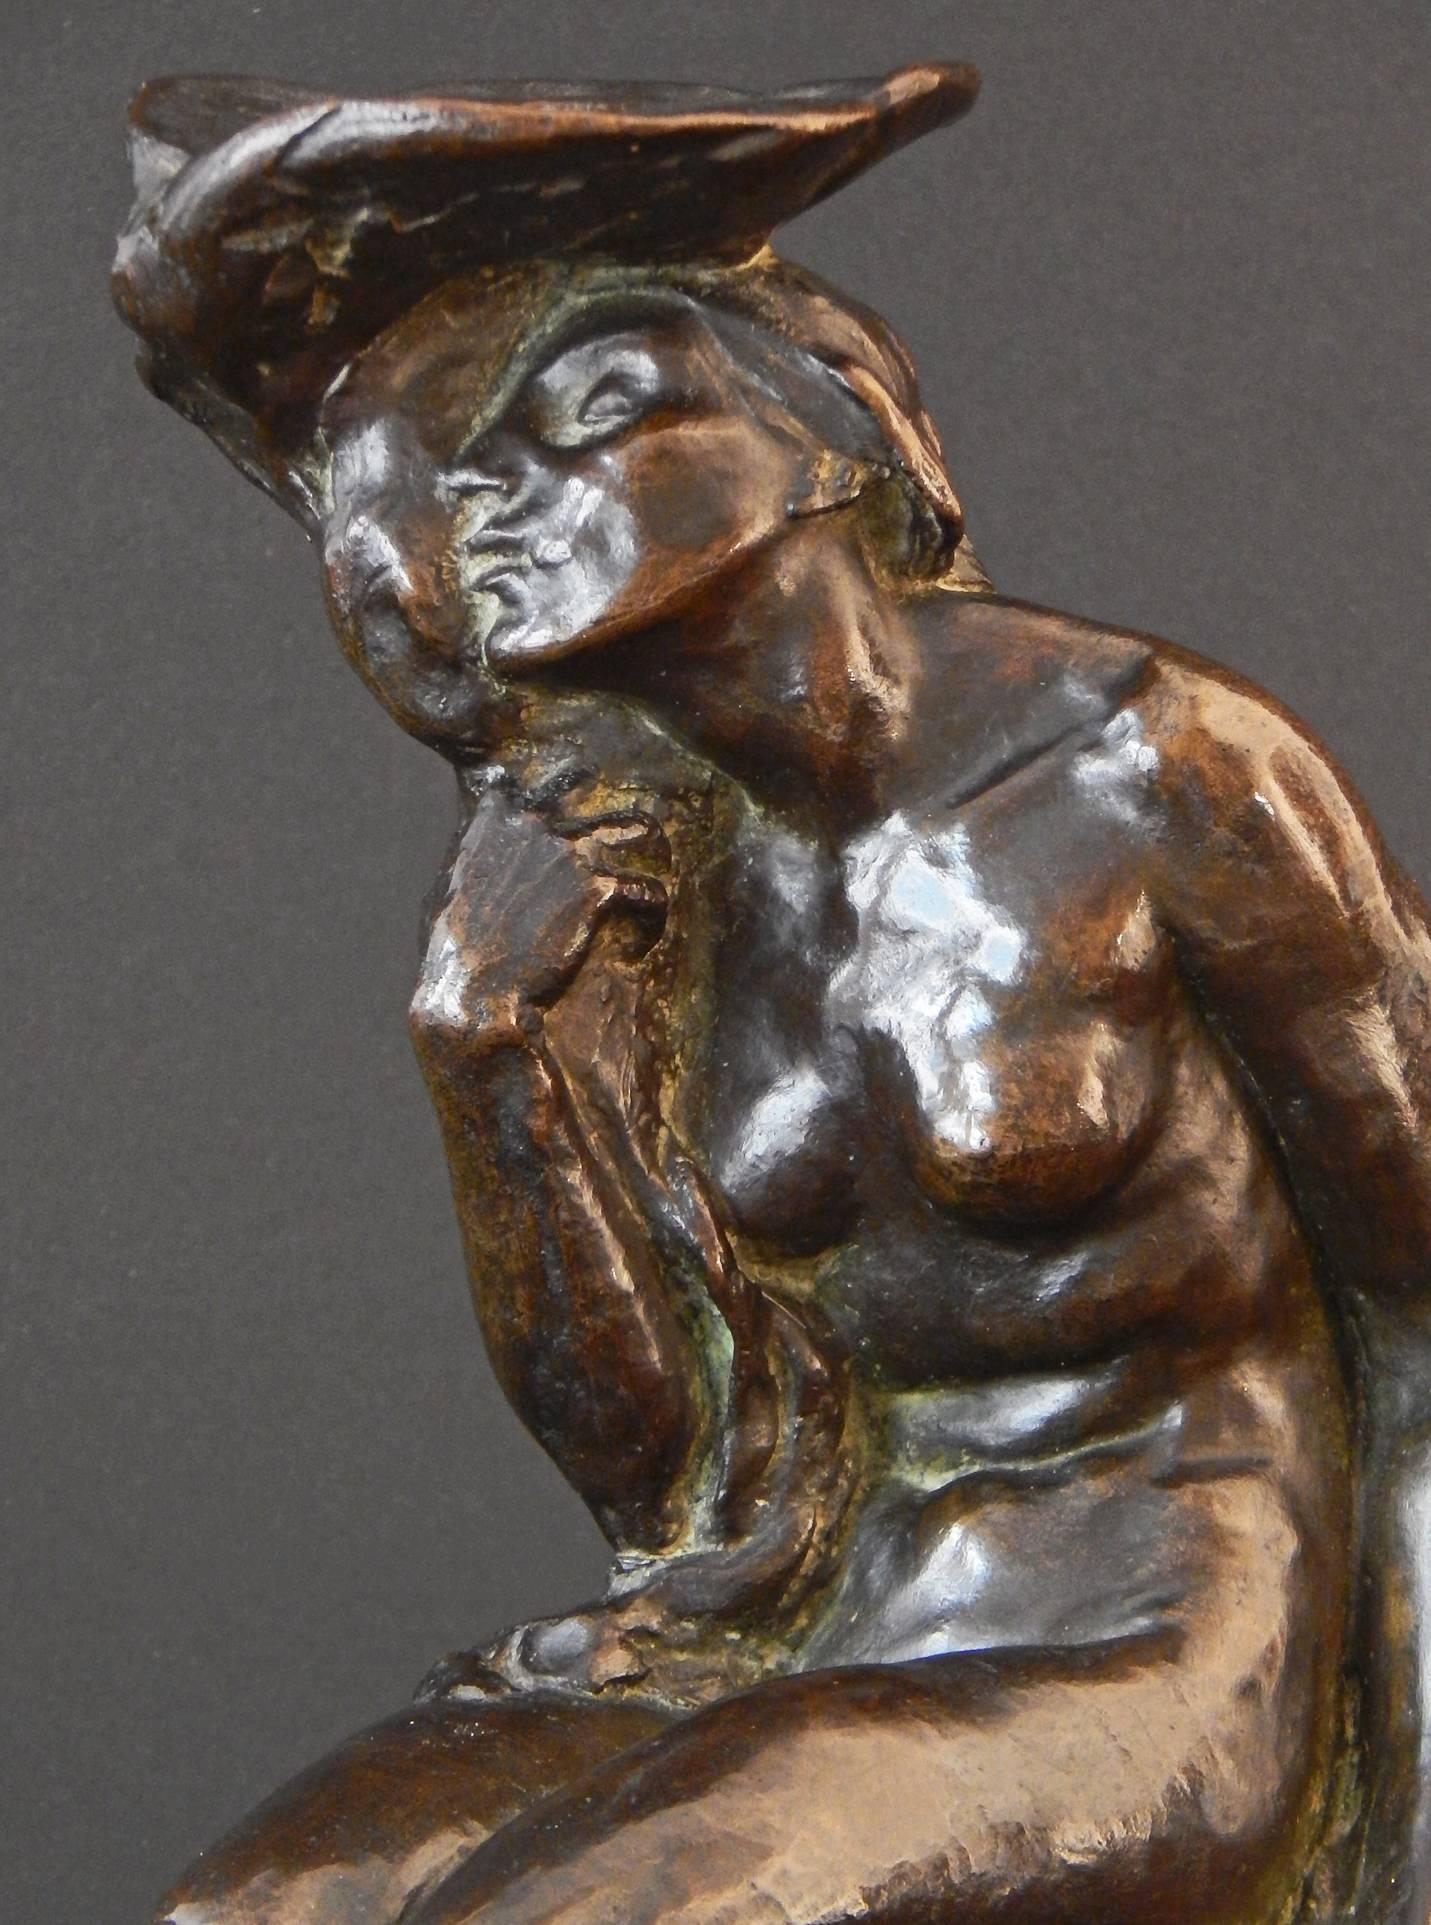 Because the Roman bronze works cast sculpture for most of America's greatest sculptors in the early 20th century, this gorgeous bronze was no doubt created by an important artist, though it is not signed. The sensuous, languorous nature of the